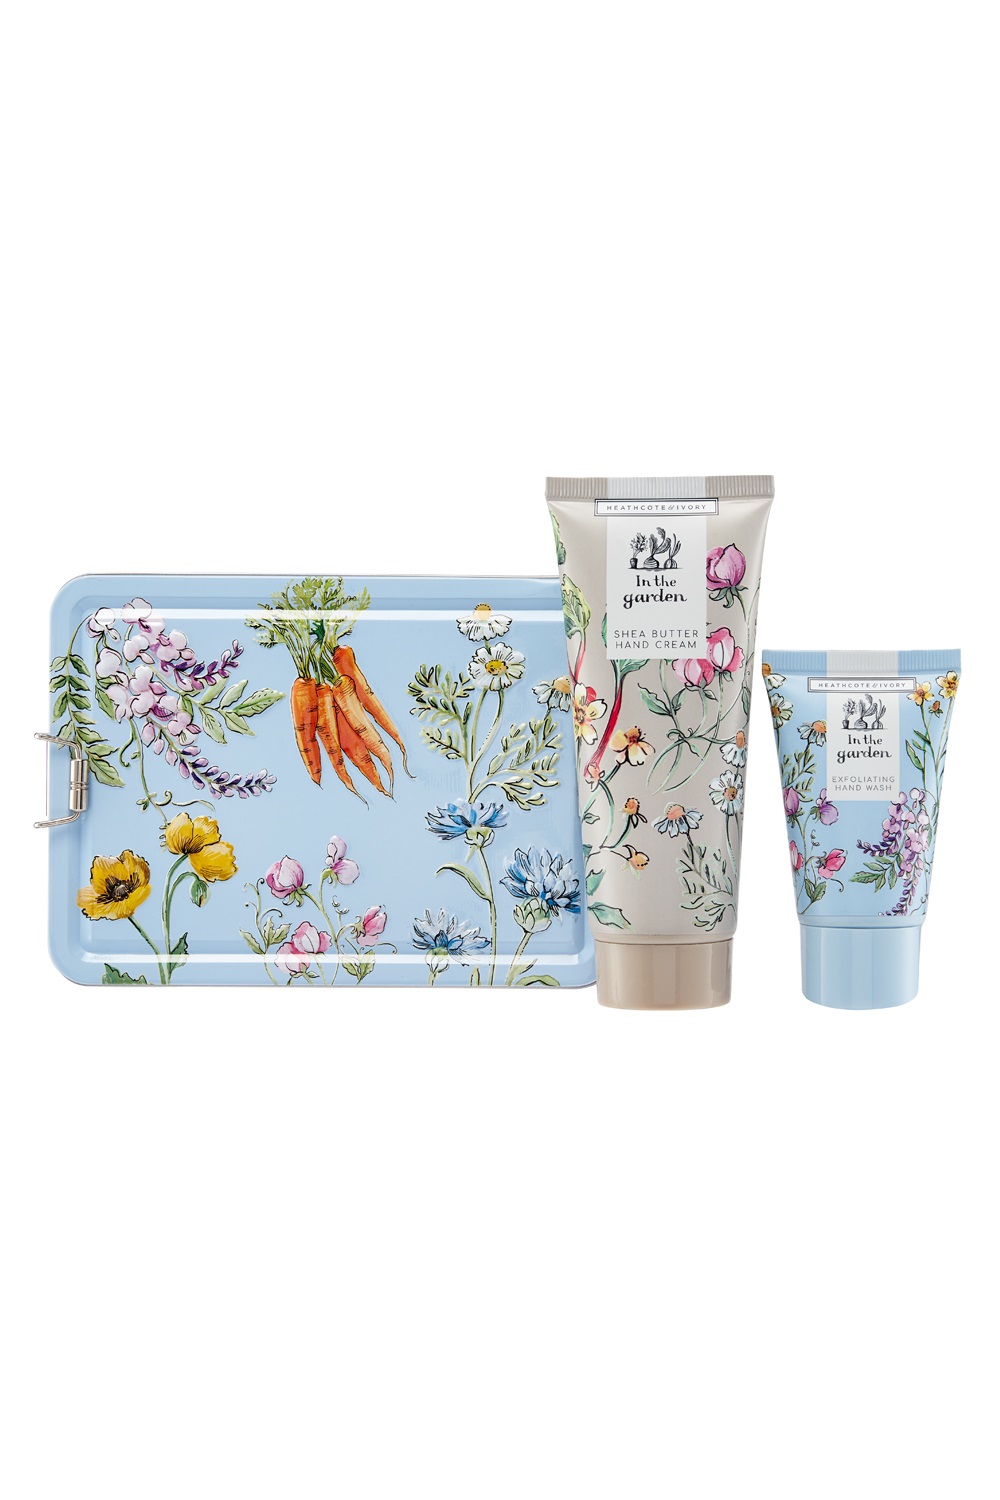  Heathcote & Ivory - In The Garden Hand Care Tin, Image 2 of 5